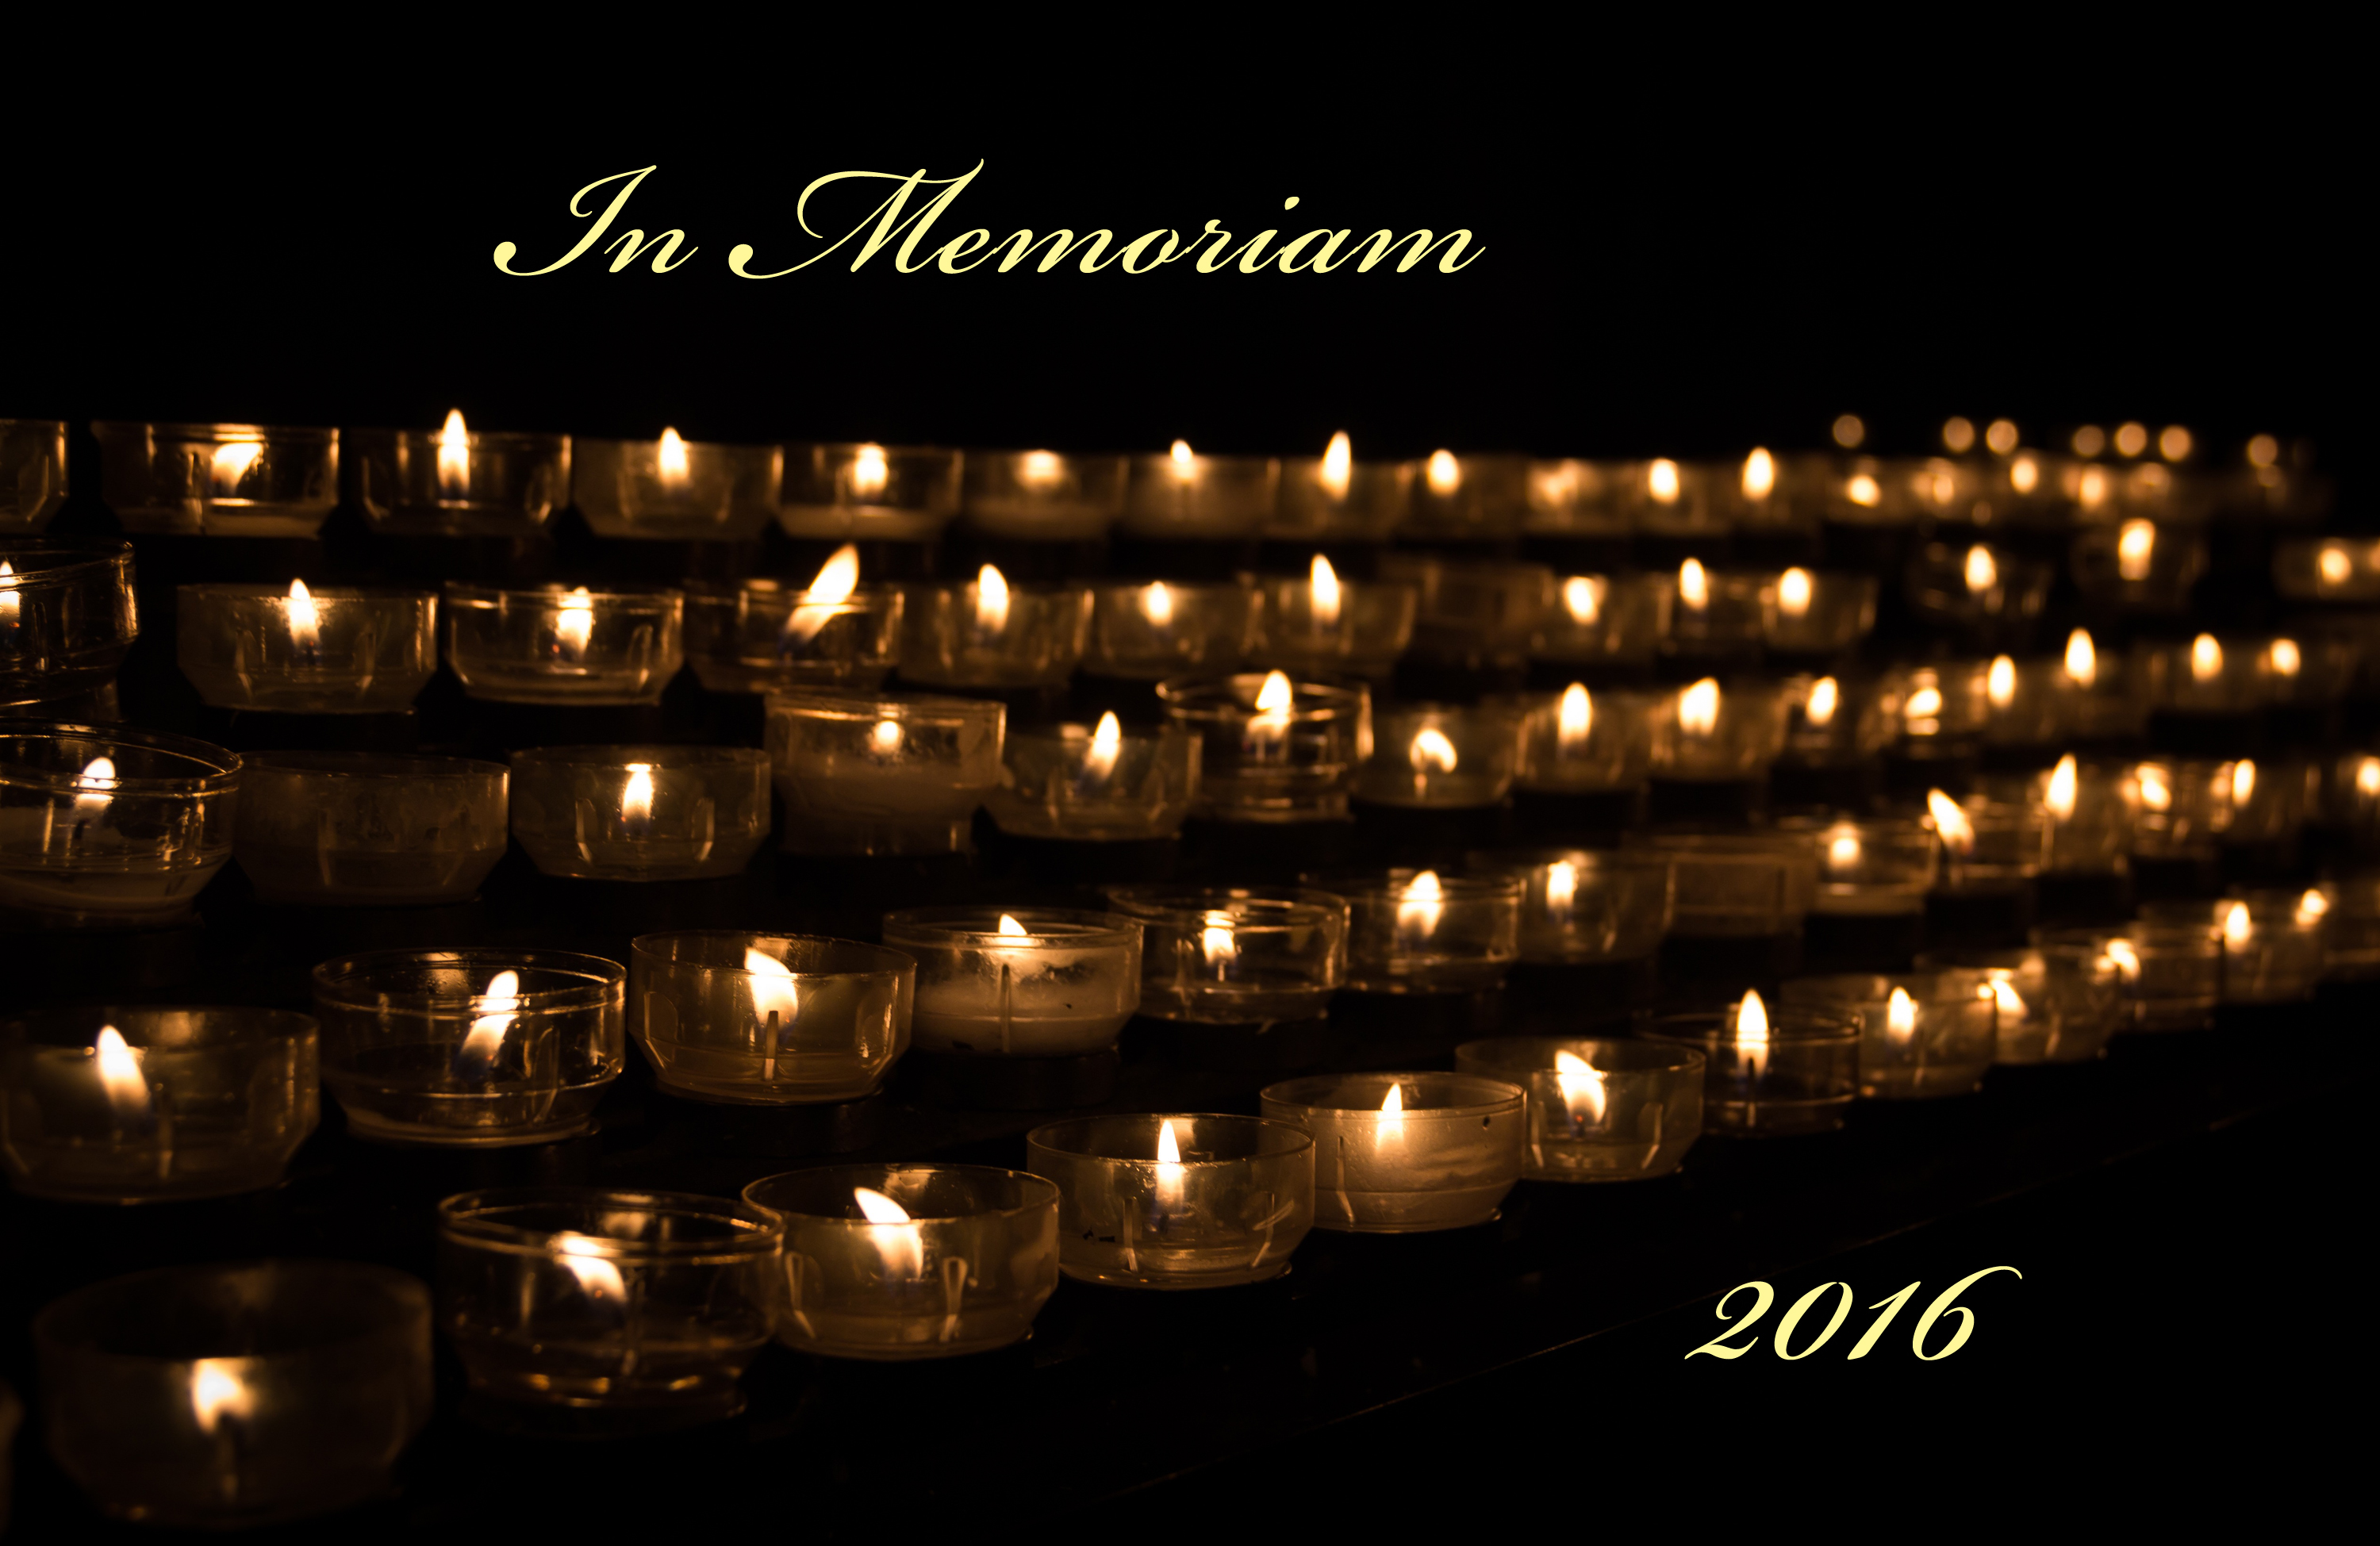 United Methodists this year marked the passing of multiple fellow churchgoers who put their faith into action. Photo by Niek Verlaan, courtesy of Pixabay